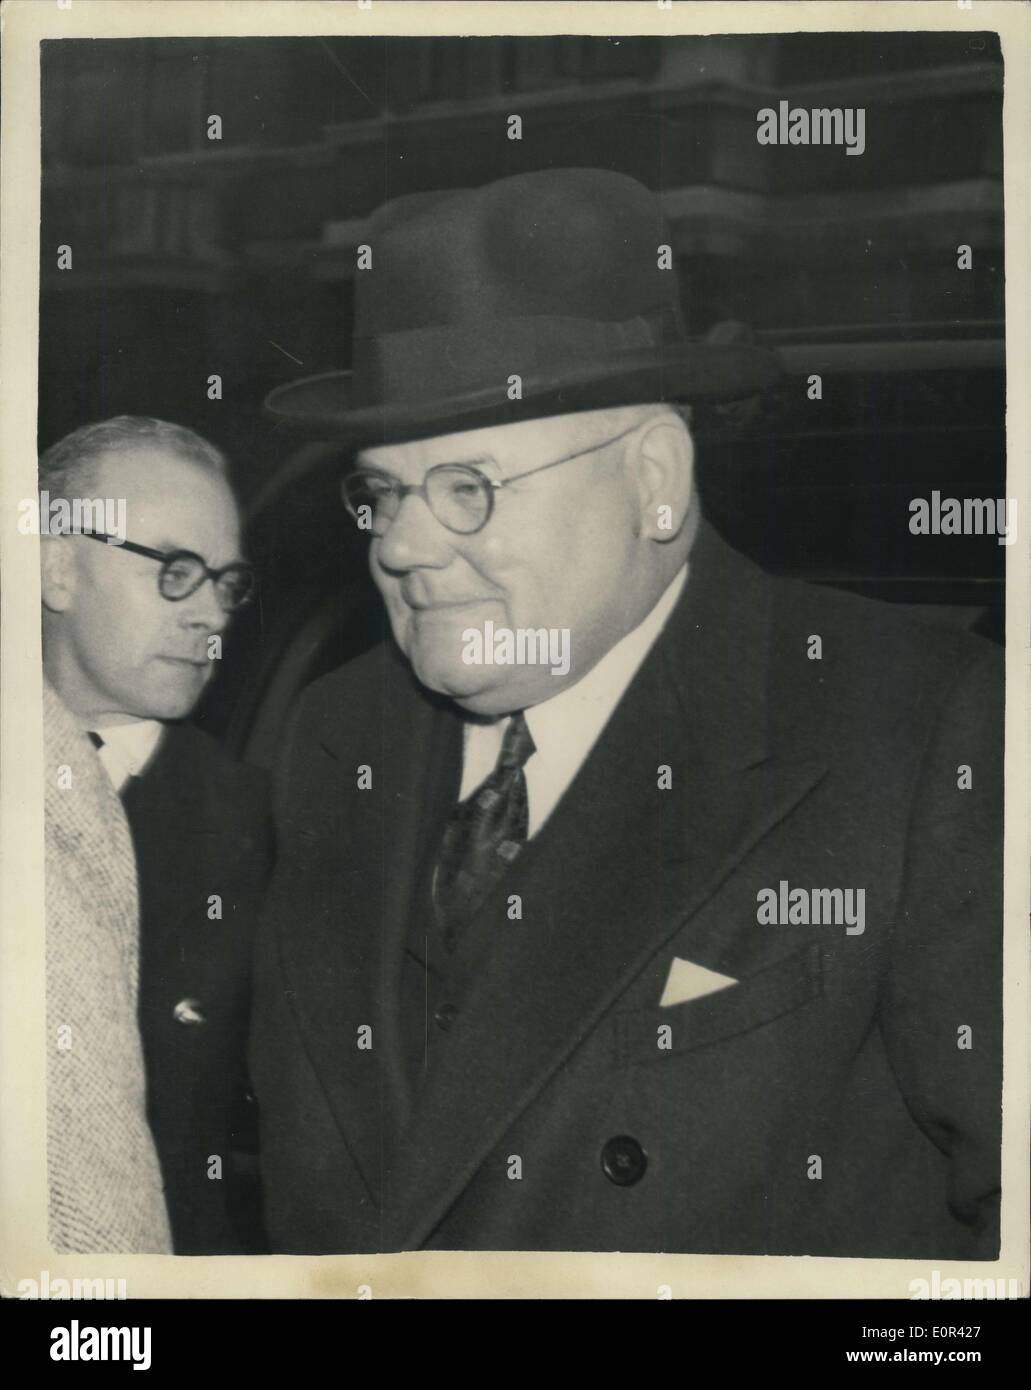 Nov. 27, 1957 - Dr. John Bodkin Adams appears in Court at Eastbourne. Faces sixteen charges: Dr. John Bodkin Adams of Eastbourne appeared in court yesterday. He is prosecuted on sixteen charges, Three of them under the Cremation Act; Three offences of causing articles to be delivered to patients ''by means of a forged instrument'' Four forgeries of National Health Prescriptions, with intent of defraud; One offers off of obtaining vaccine with a forged instrument; One offence of causing delivery of drugs and medicine by a false pretence and Three offences under the Dangerous Drugs Act - Stock Photo